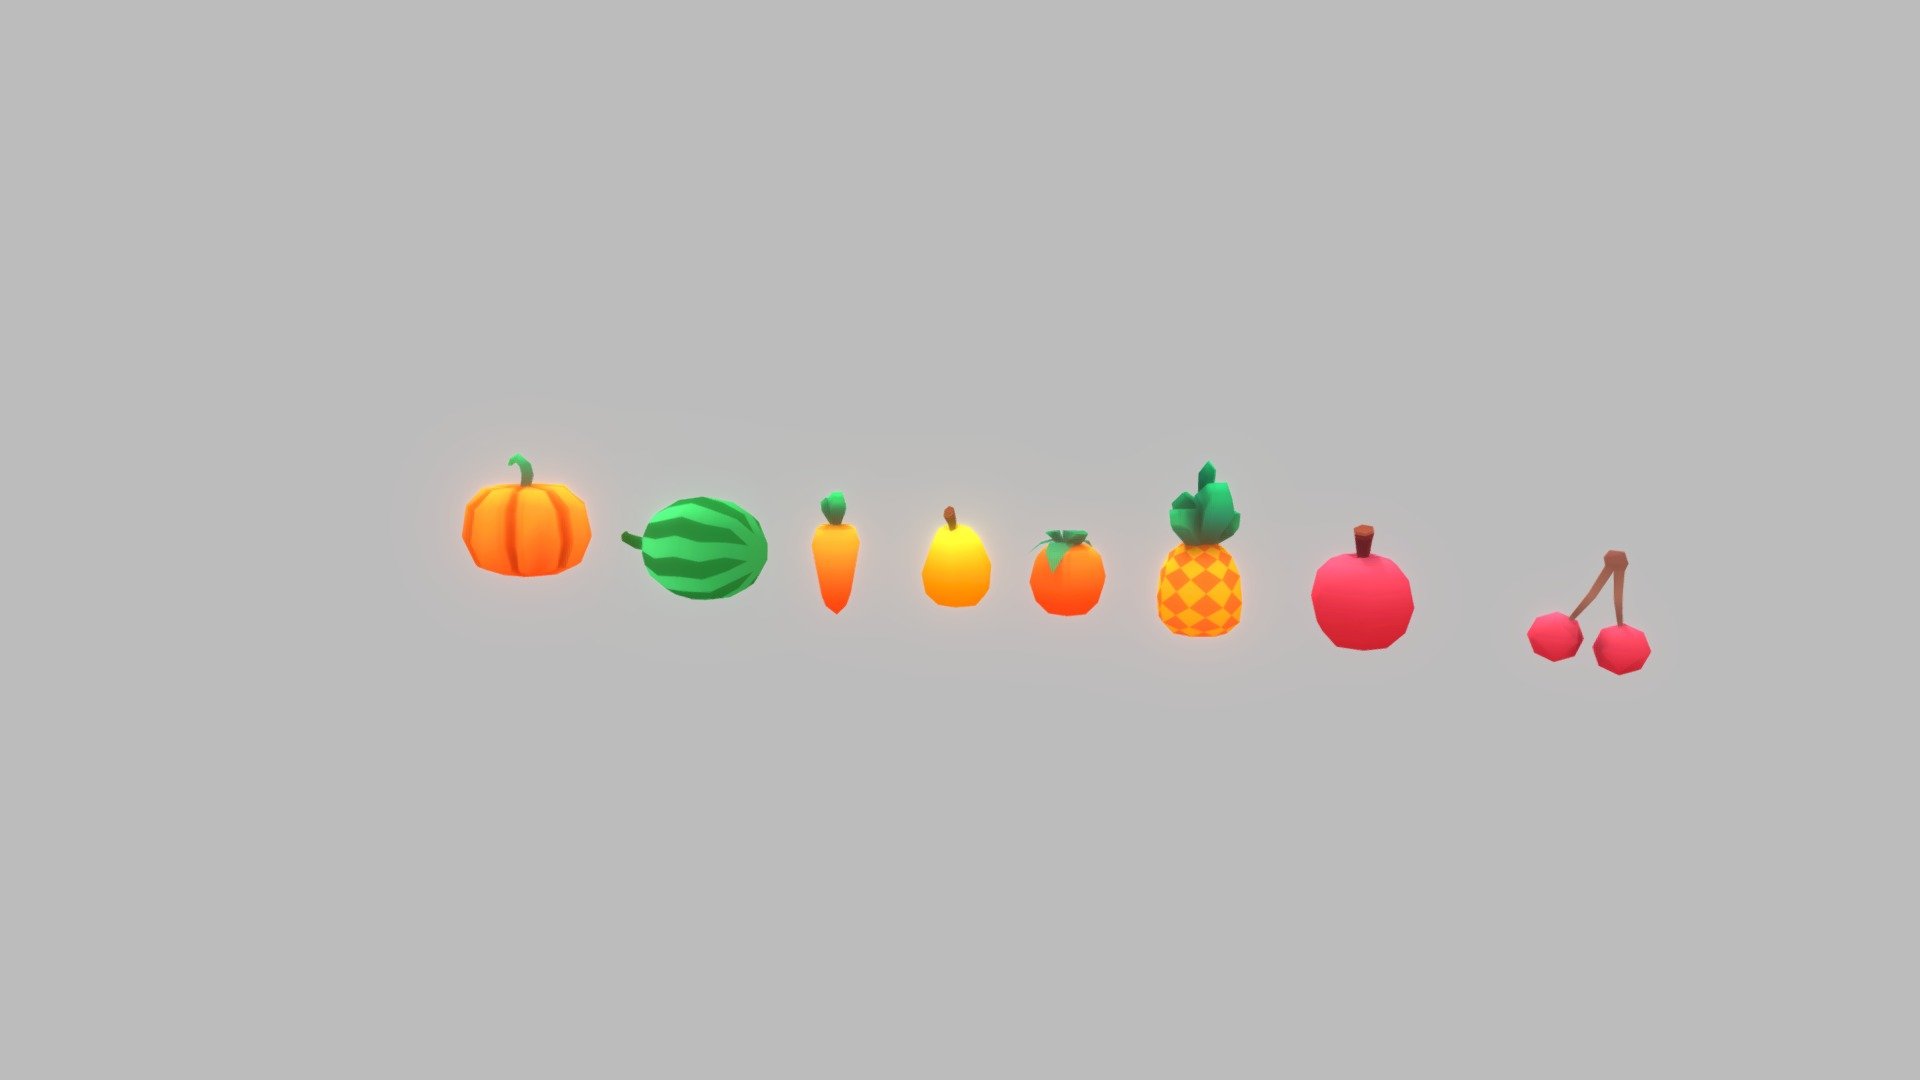 Pack include apple, carrot, cherry, orange, pear, pineapple, pumkin, watermelon
Ready for game mobile, etc - Fruits low poly pack - 3D model by trunglemedia 3d model